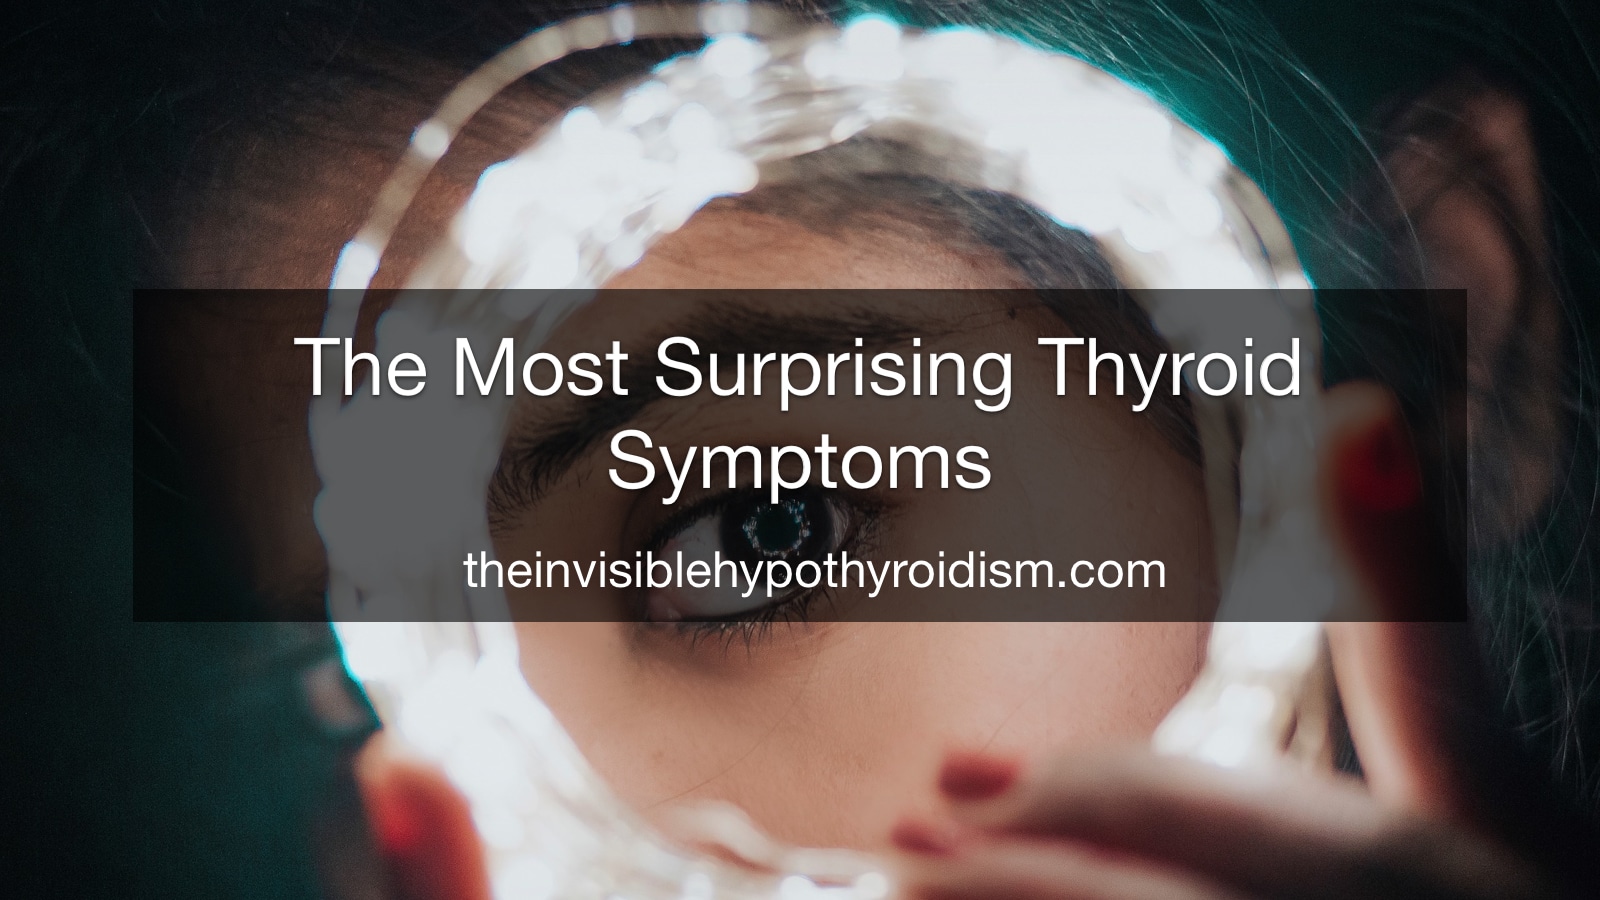 The Most Surprising Thyroid Symptoms